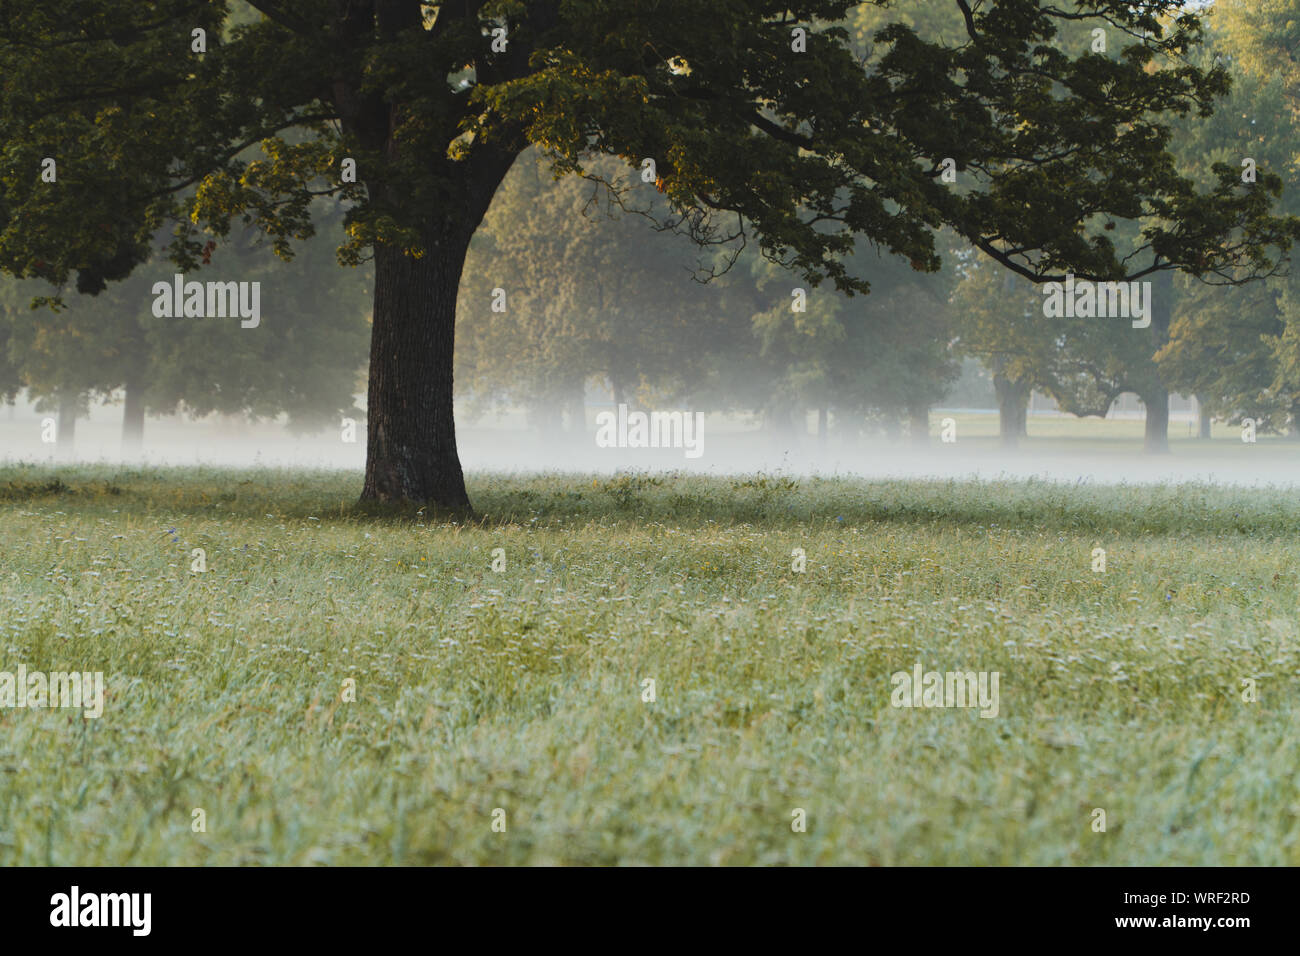 A tree in the morning mist on a field Stock Photo